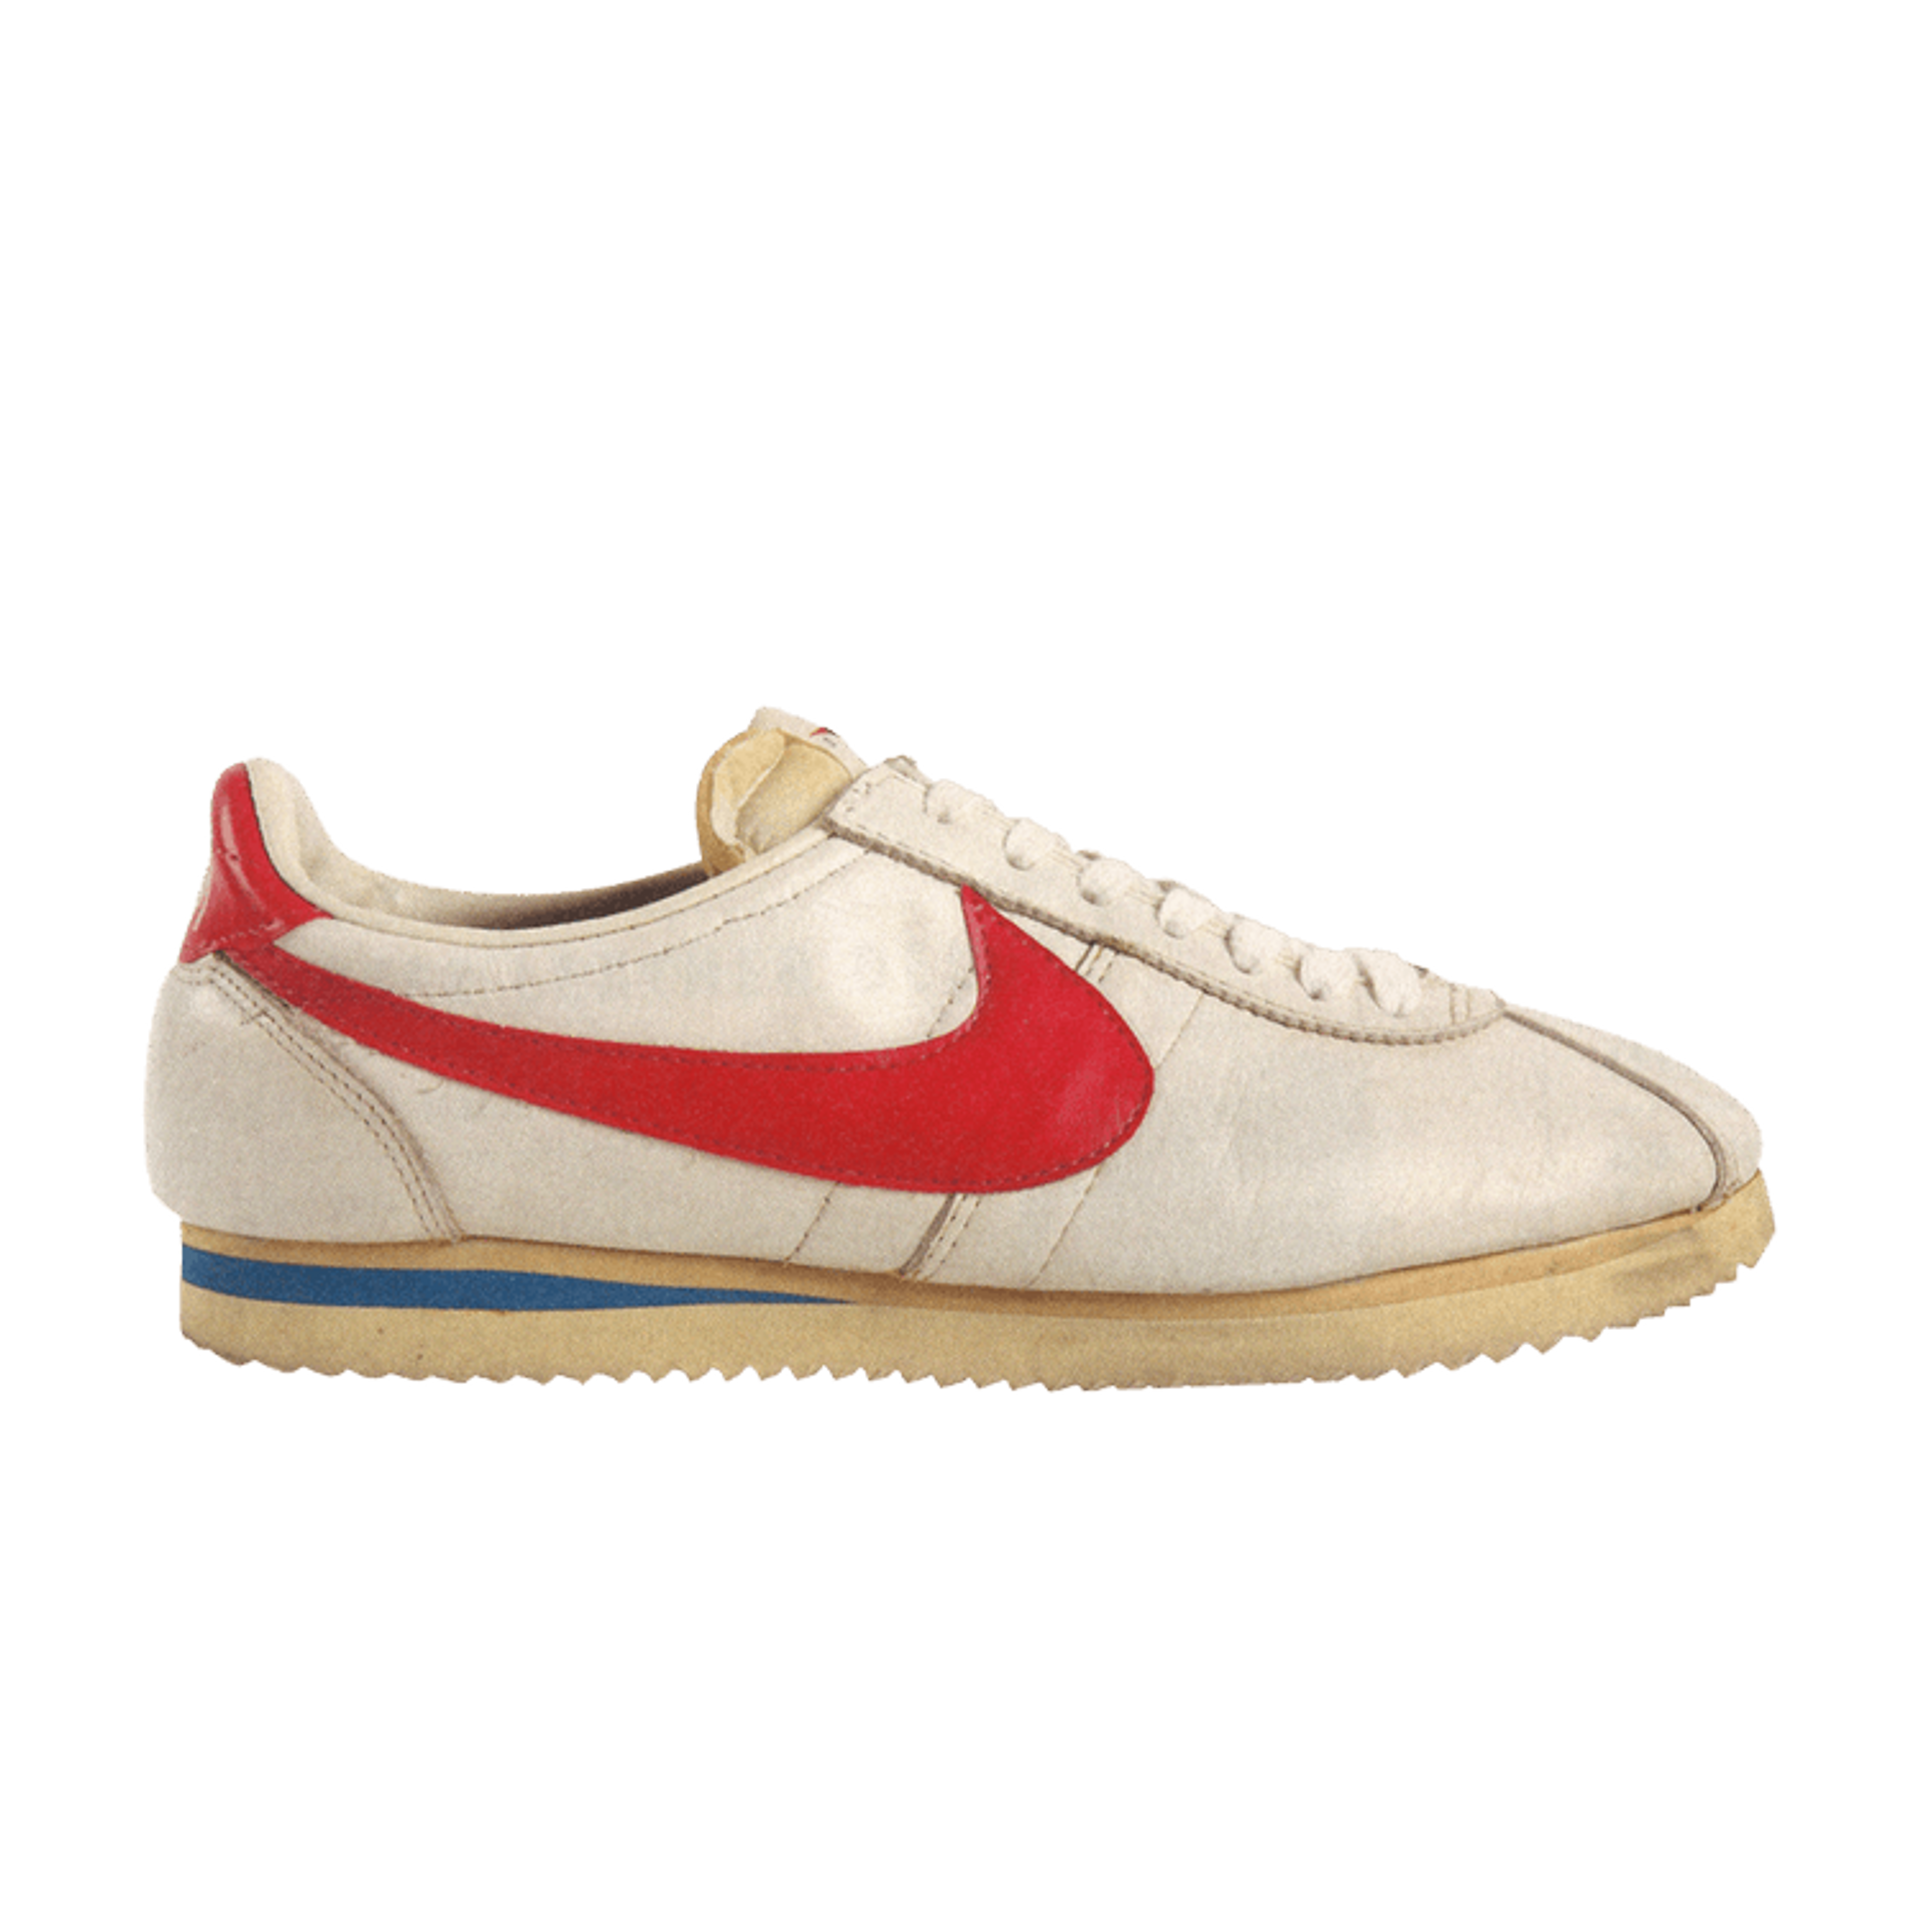 Cortez Leather Deluxe 'White Red' 1977